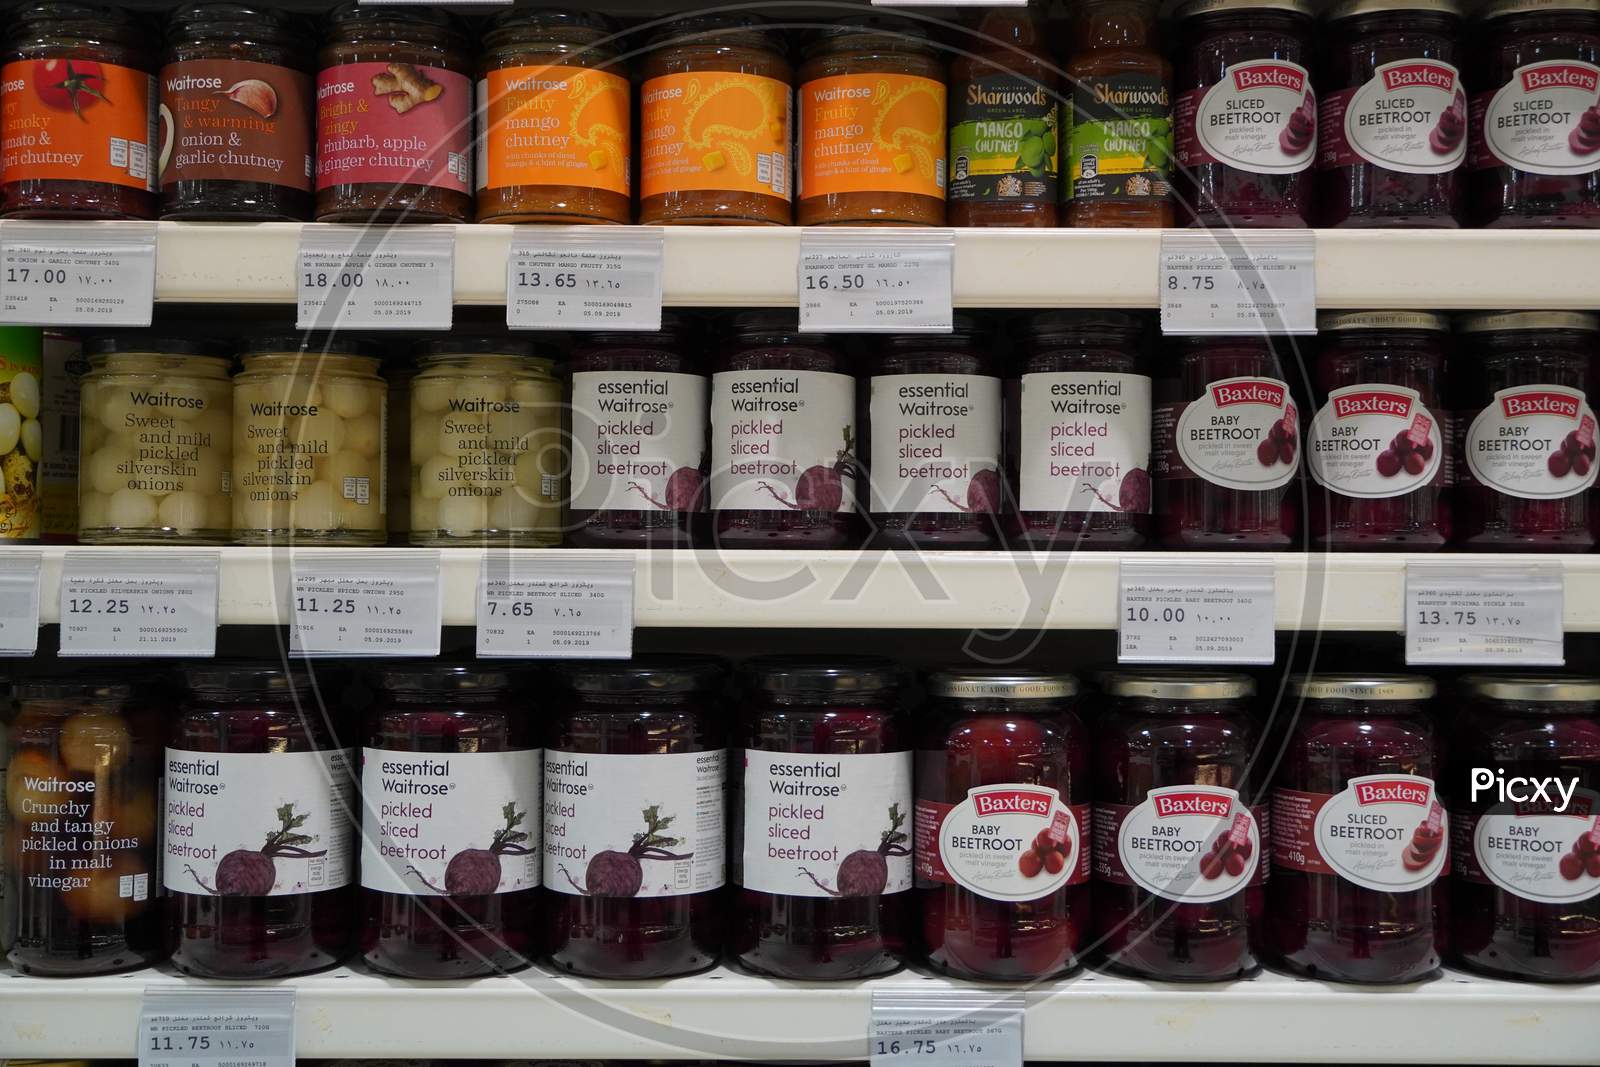 Dubai Uae December 2019 Traditional Turkish Pickles Of Various Fruits And Vegetables. Jars Of Salted Pickles On A Store Shelf. Beetroot, Olives, Cabbage, Cucumber, Onion, Tomato.